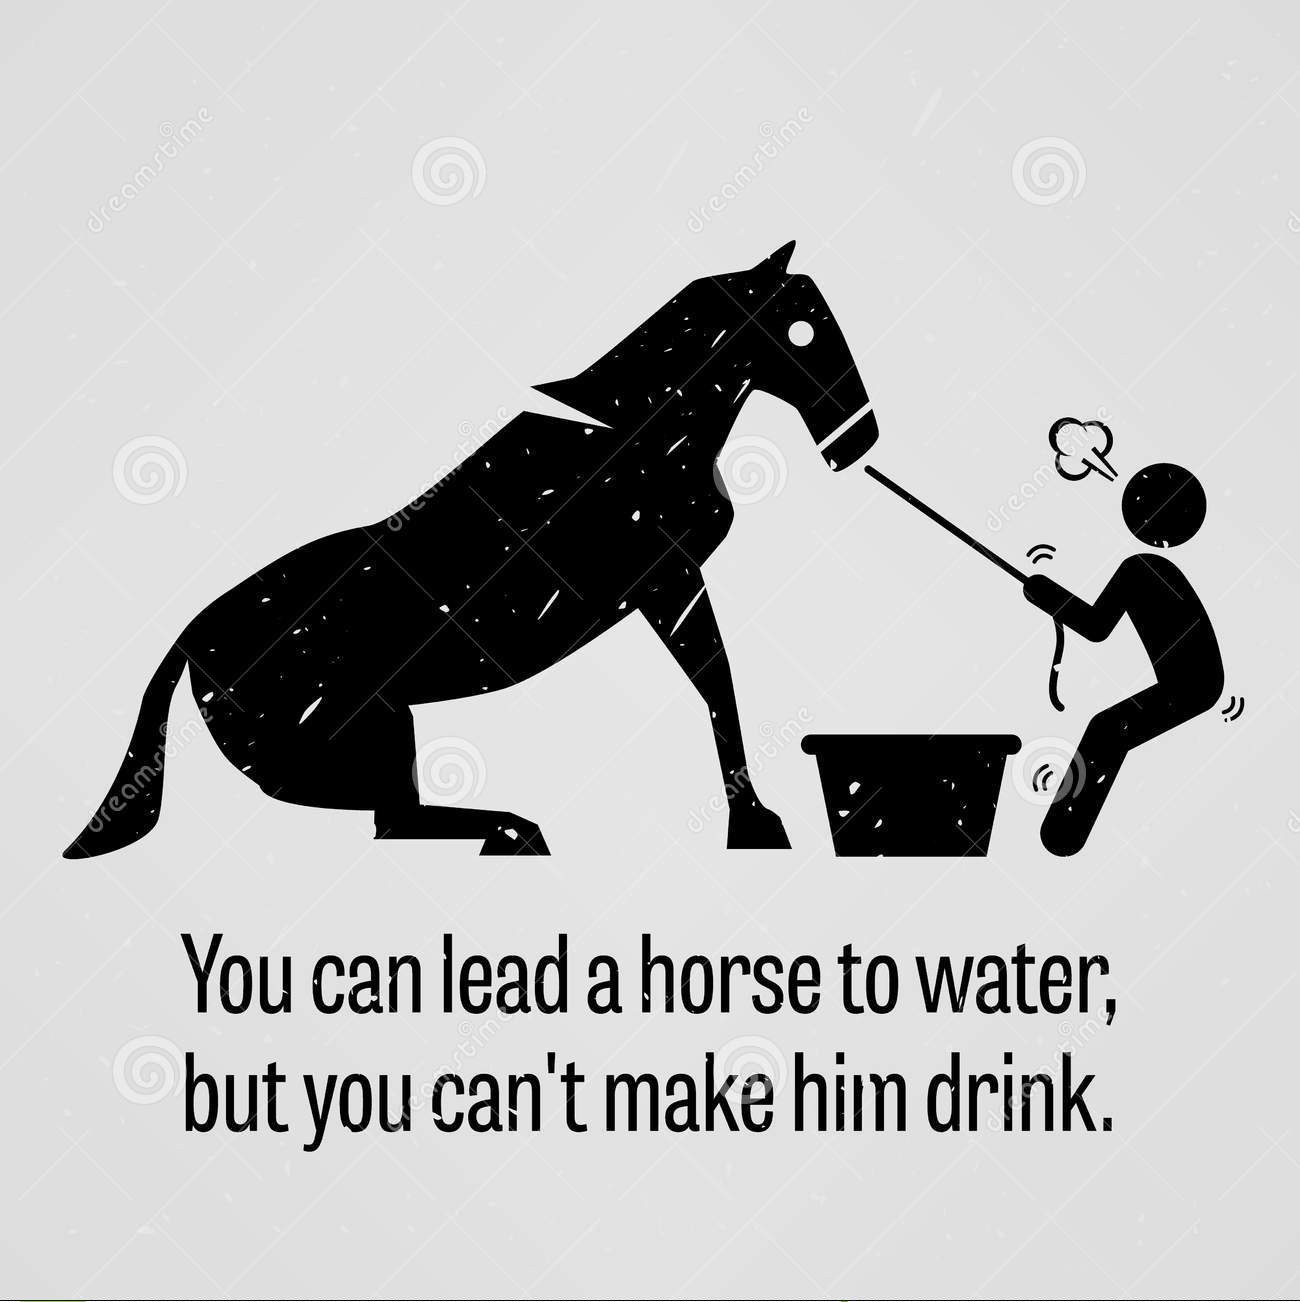 you-can-lead-horse-to-water-you-cannot-make-him-drink-motivational-inspirational-poster-repres...jpg